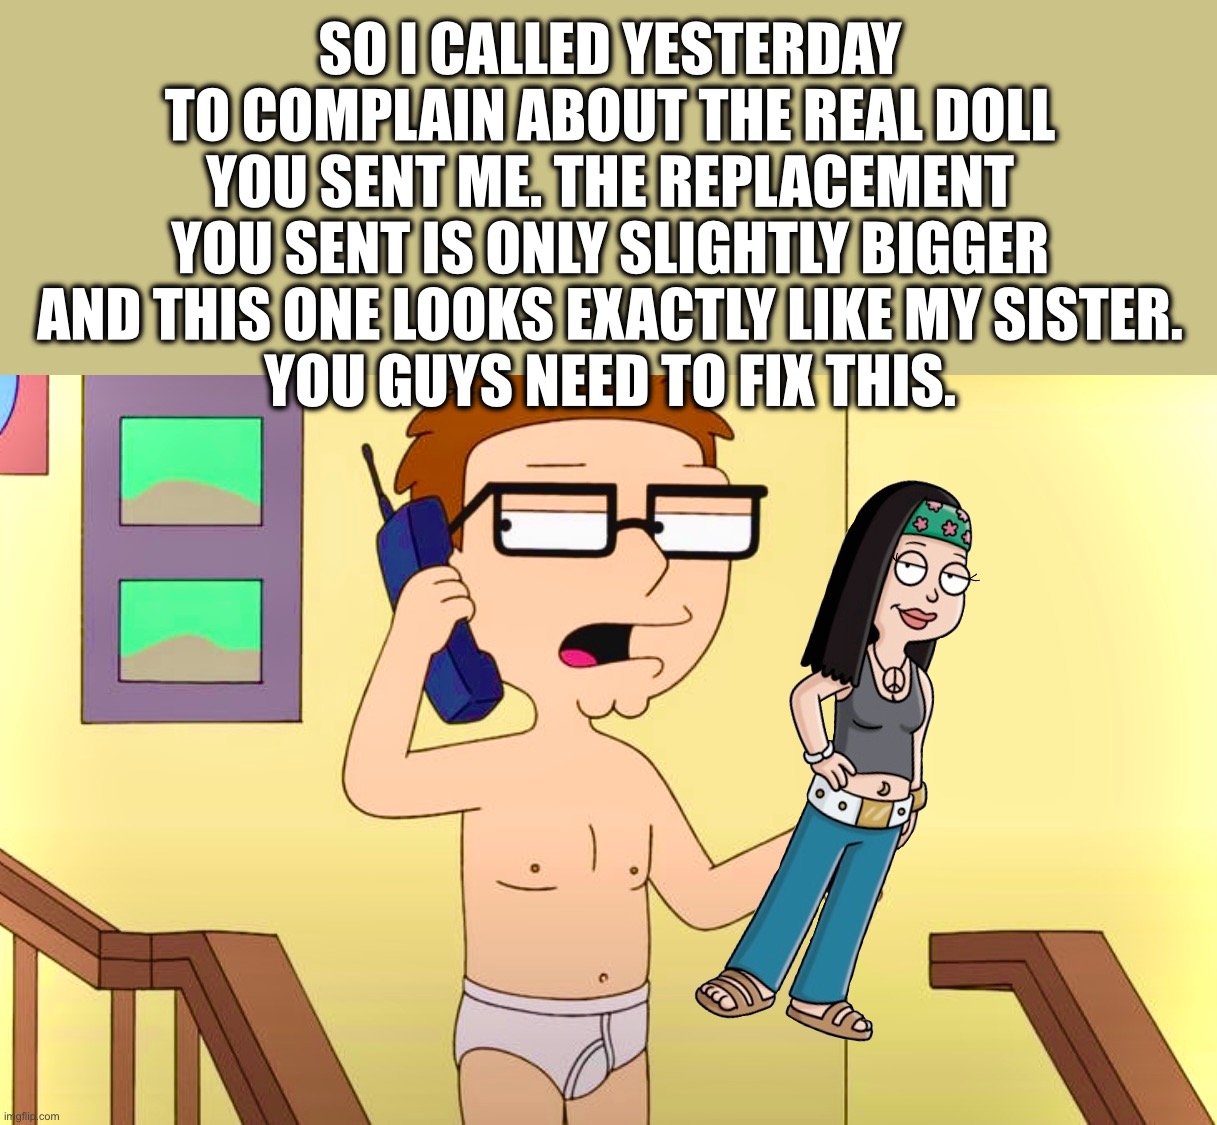 American Don’t Part II | SO I CALLED YESTERDAY TO COMPLAIN ABOUT THE REAL DOLL YOU SENT ME. THE REPLACEMENT YOU SENT IS ONLY SLIGHTLY BIGGER AND THIS ONE LOOKS EXACTLY LIKE MY SISTER.
YOU GUYS NEED TO FIX THIS. | image tagged in doll,memes,american dad,sister,creepy doll | made w/ Imgflip meme maker